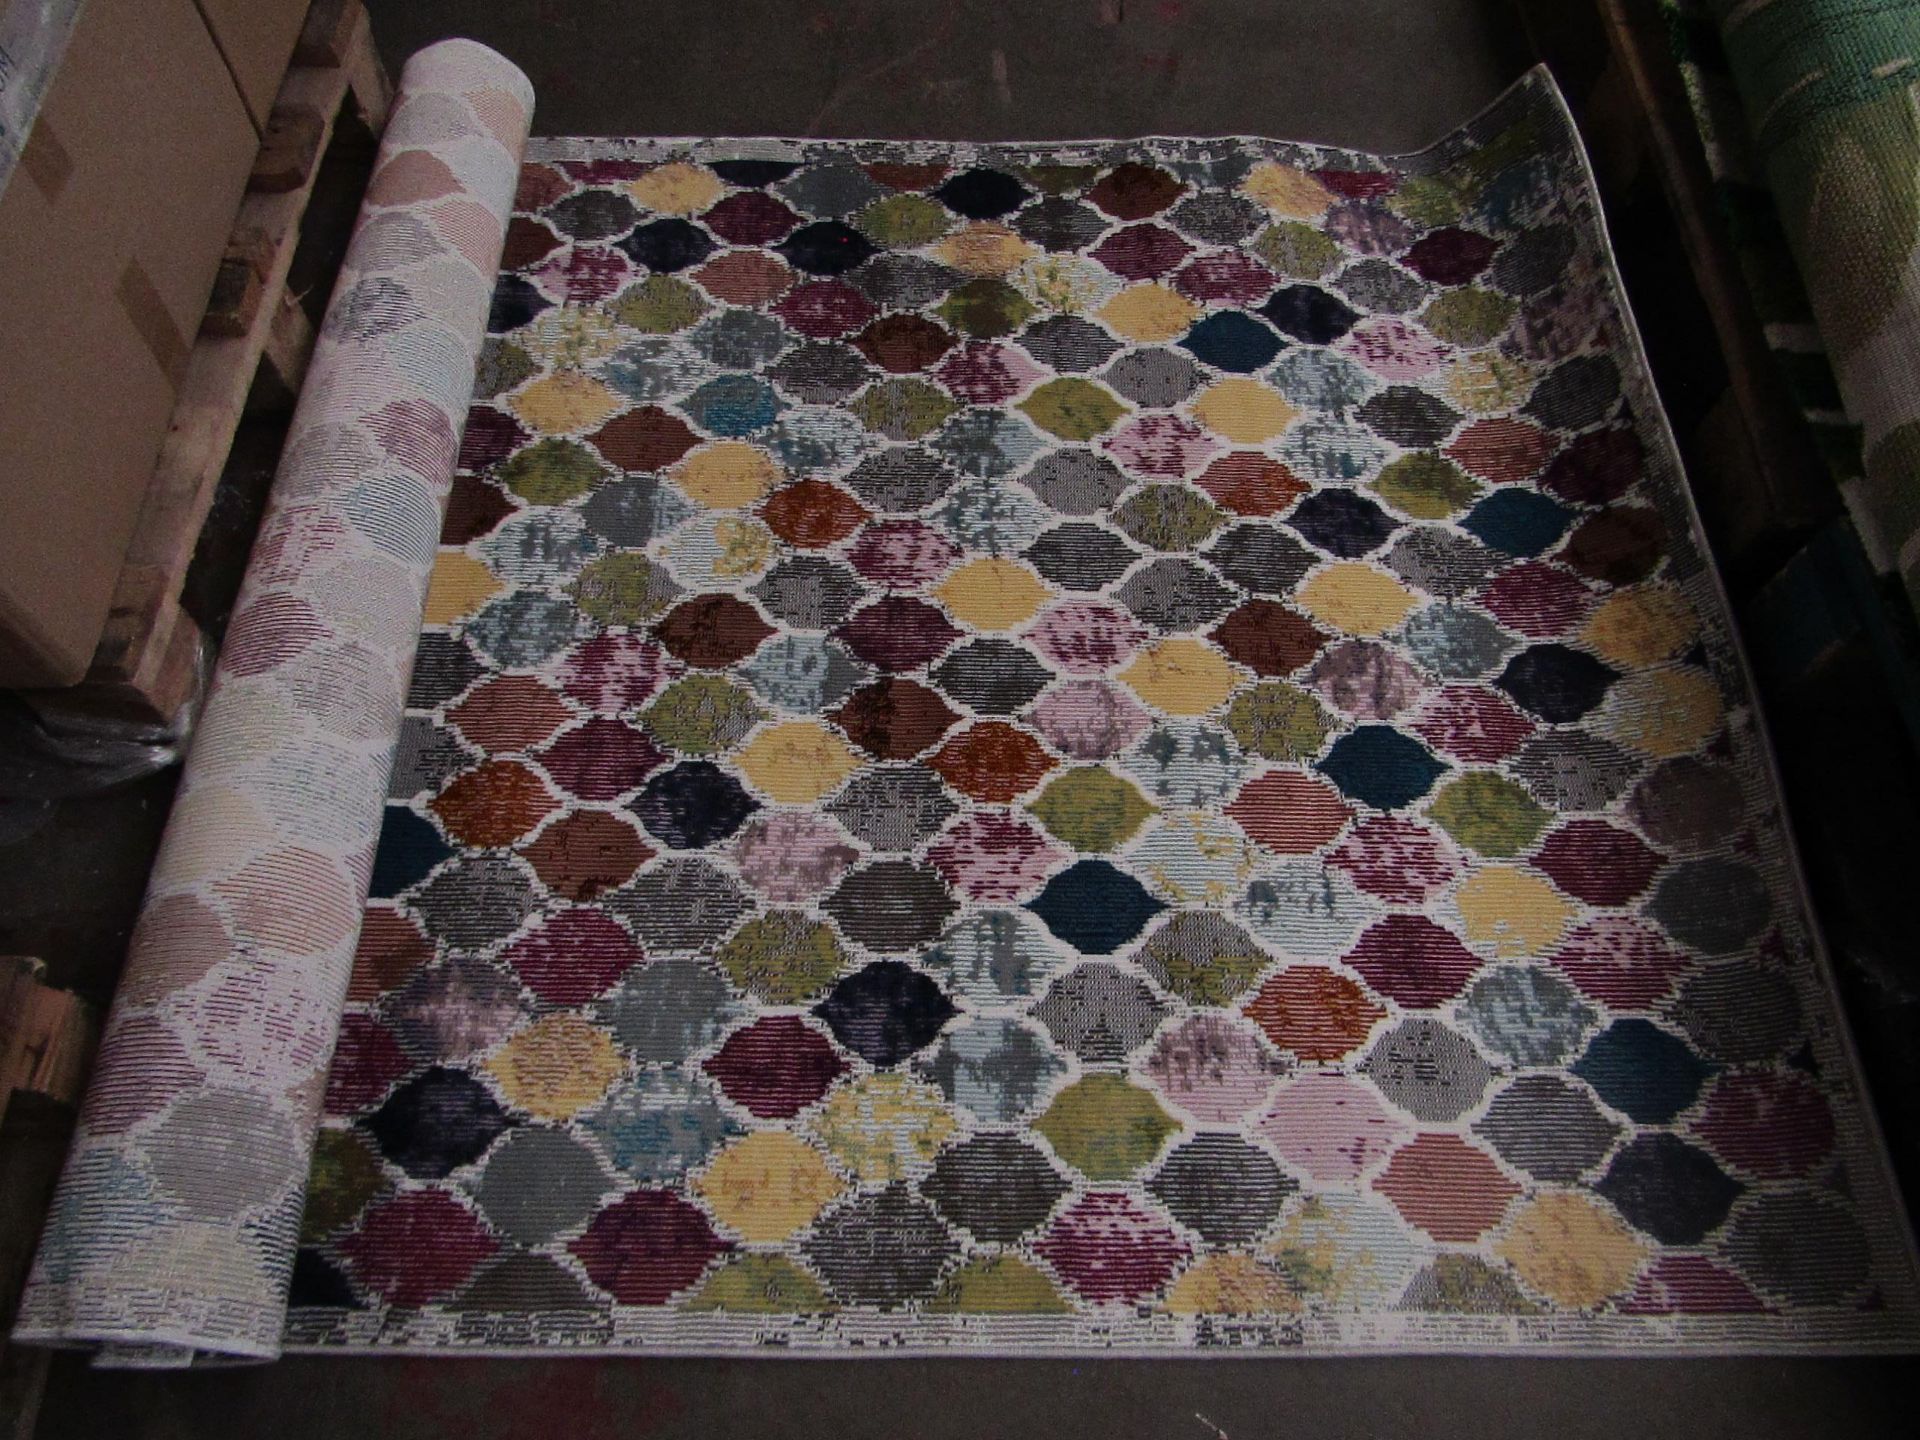 1 x La Redoute Rug RRP £99.00 SKU LAR-DIR-2000010629596 TOTAL RRP £99 This lot is a completely